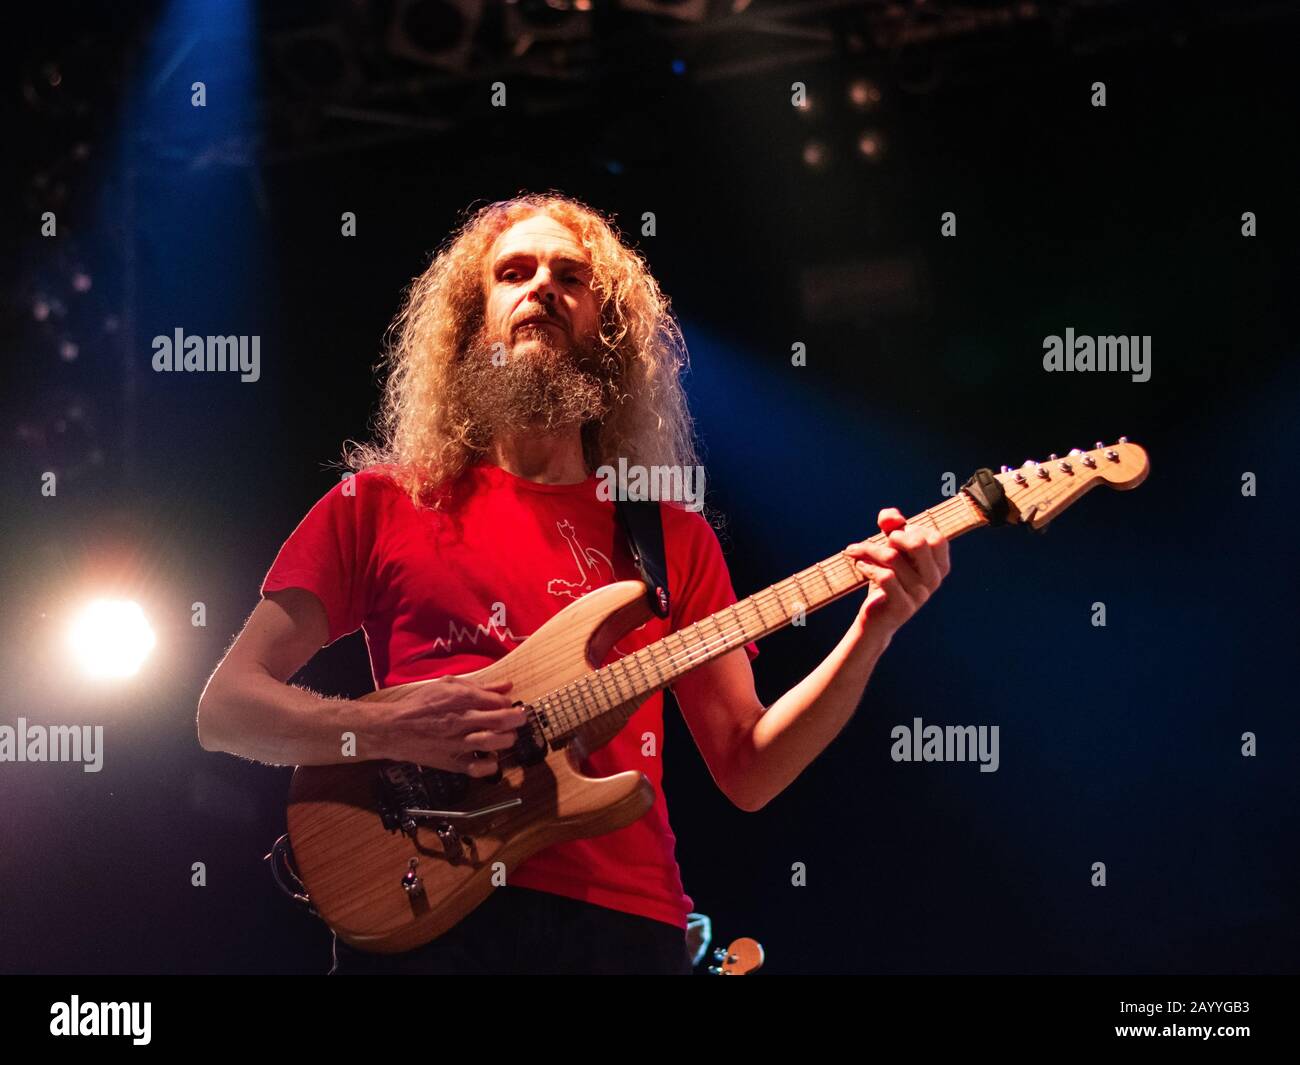 Milan, Italy. 16 February 2020. American progressive rock band MONSTER MAGNET performs at LIVE MUSIC CLUB. Brambilla Simone Photography Live News Stock Photo